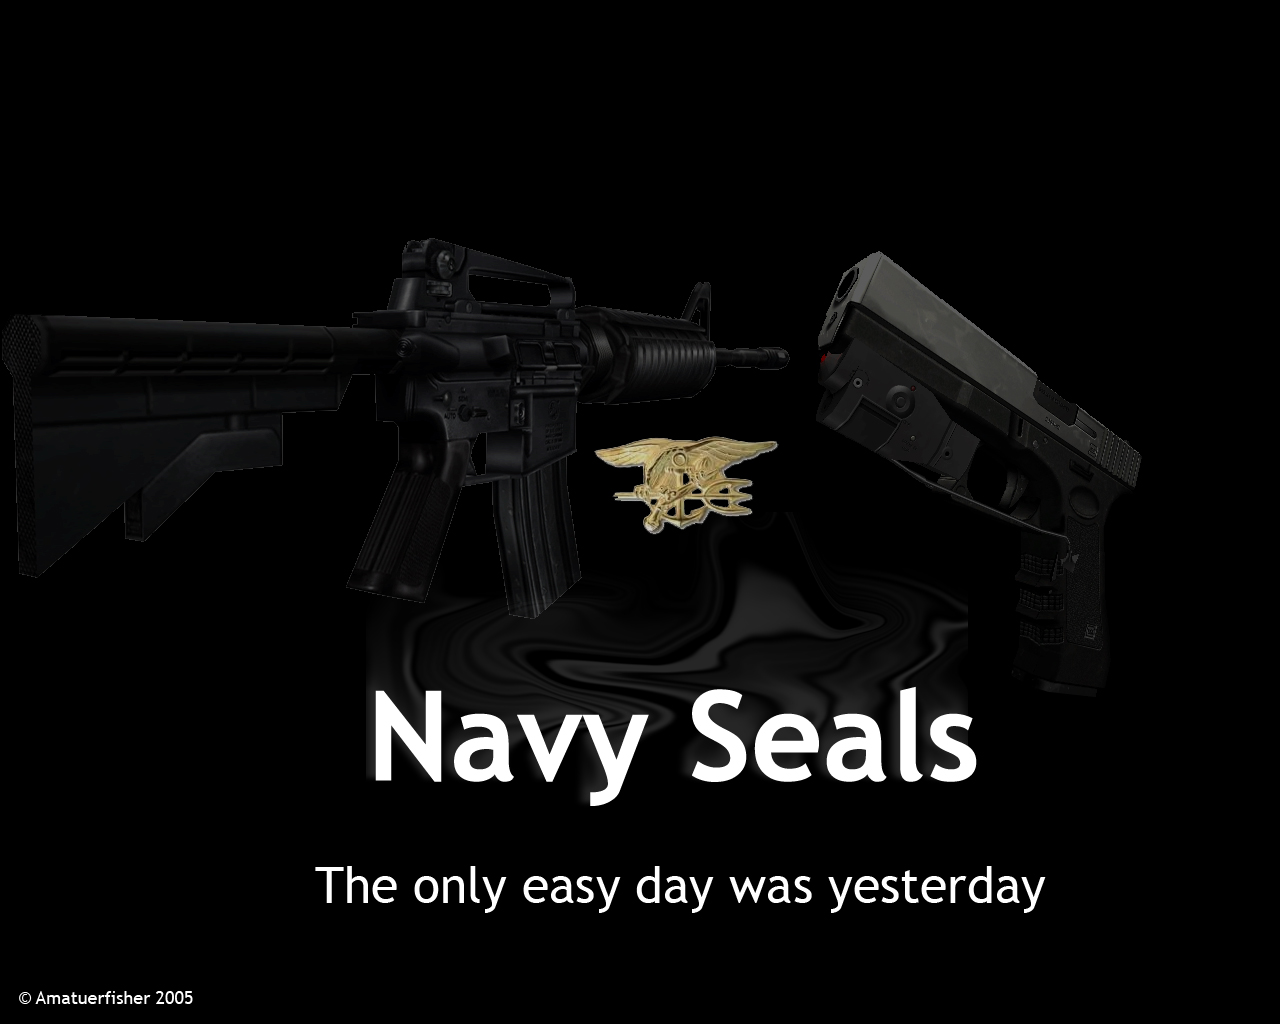 Navy Seals by amatuerfisher 1280x1024